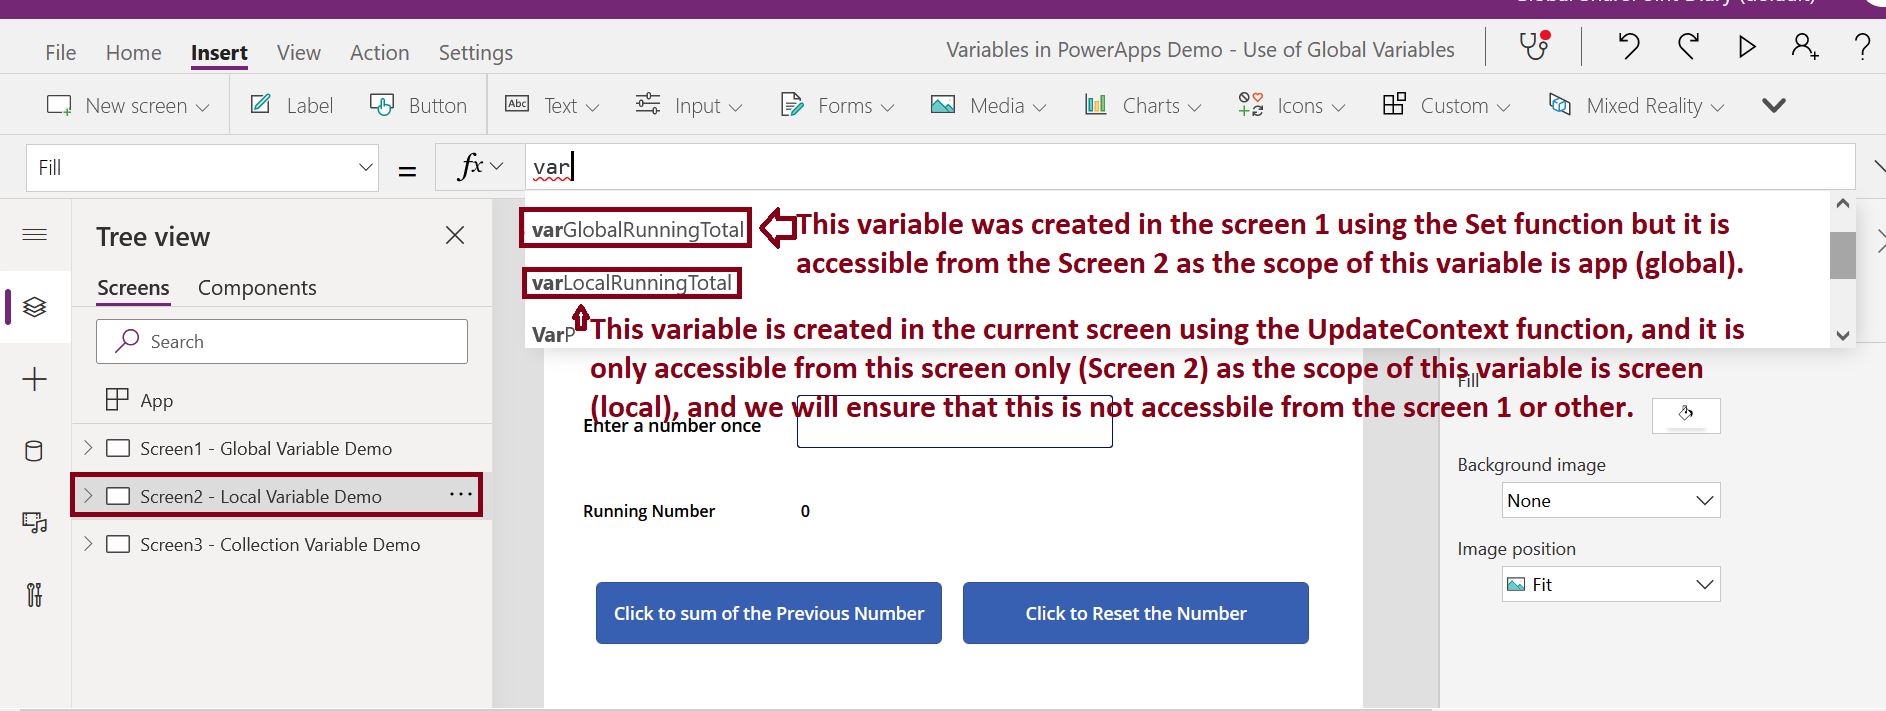 PowerApps variables scope verification demo